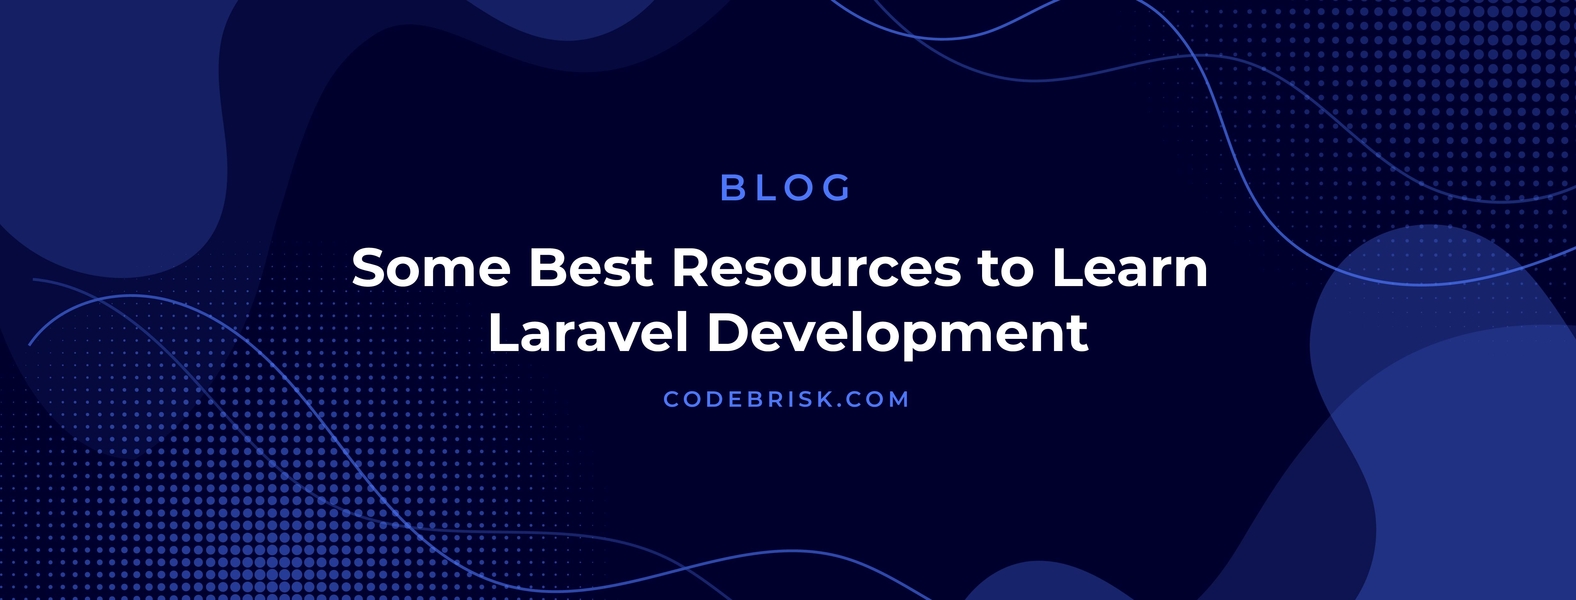 Some Best Resources to Learn Laravel Development